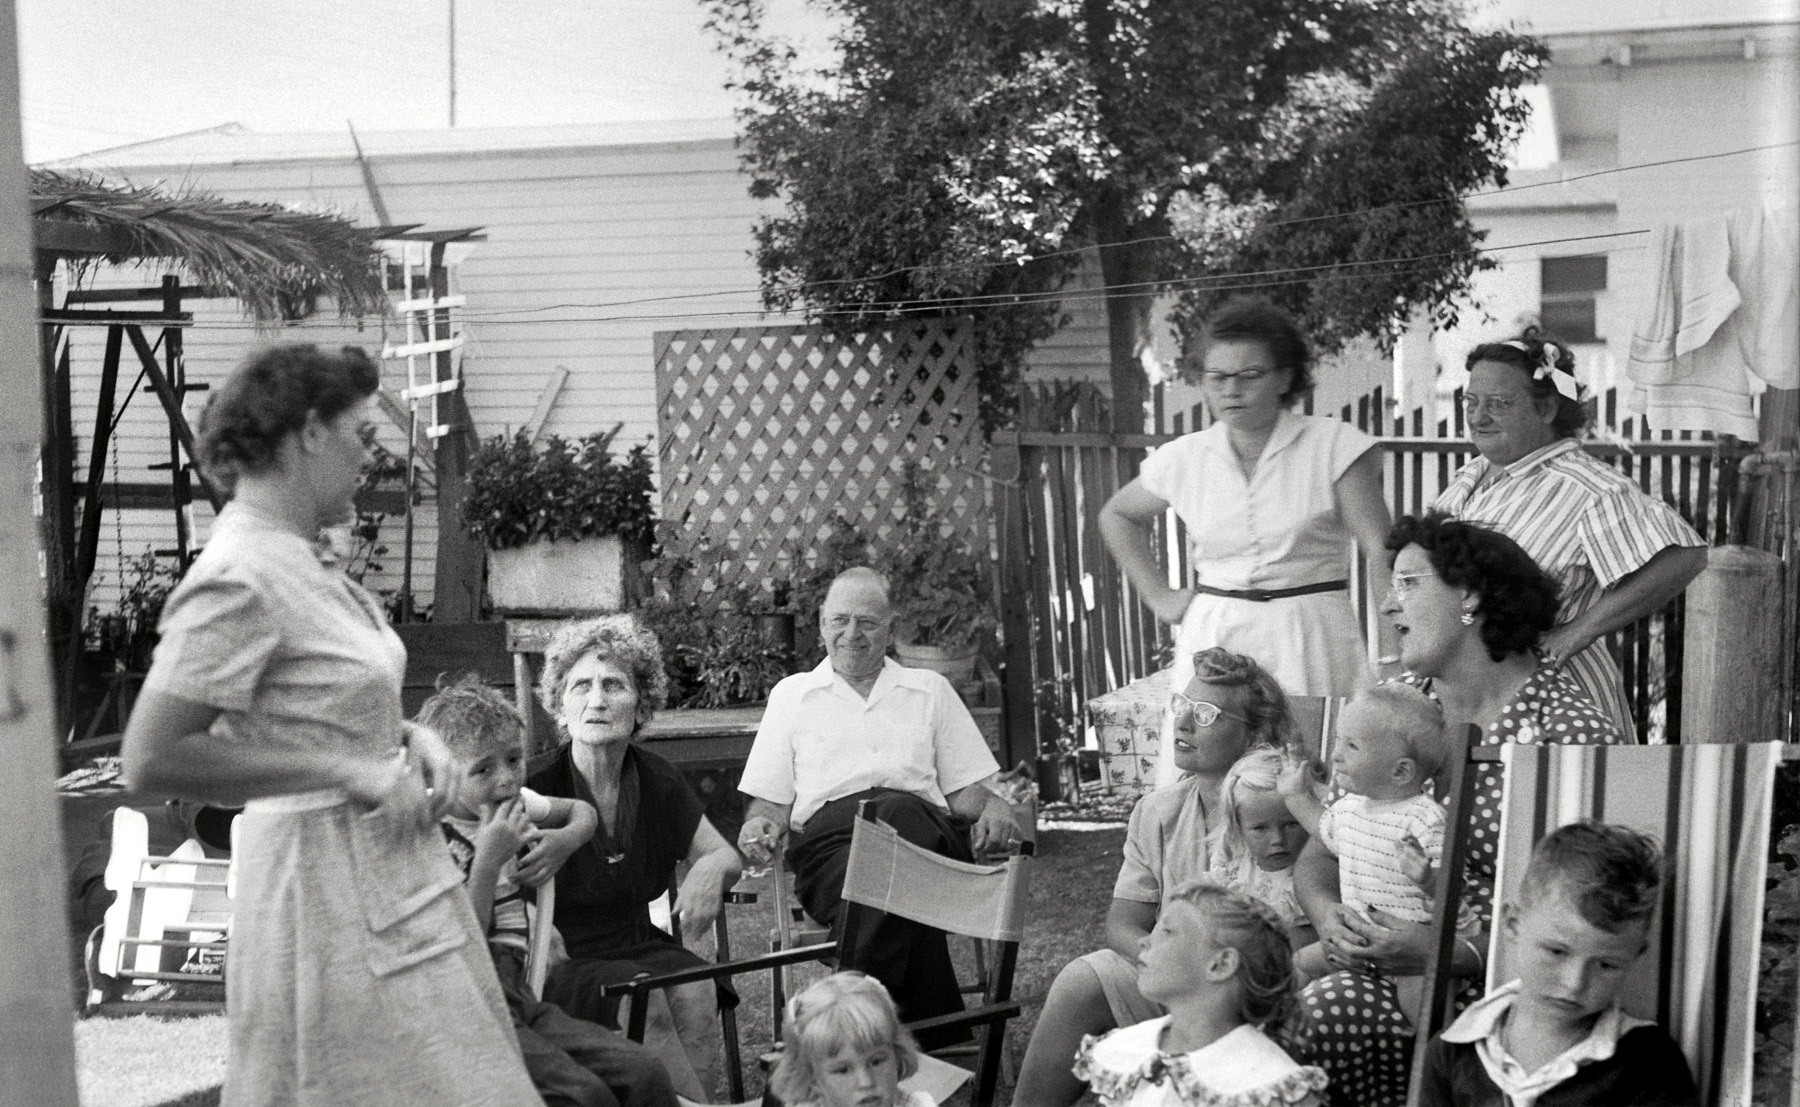 I don't know who all the people are, but the woman third from the left is grandmother Carrie Fox and the woman farthest to the right I only know as "Babe" (who, if I remember right, was the maid). If I had to hazard a guess, I'd say this is the early fifties. View full size.